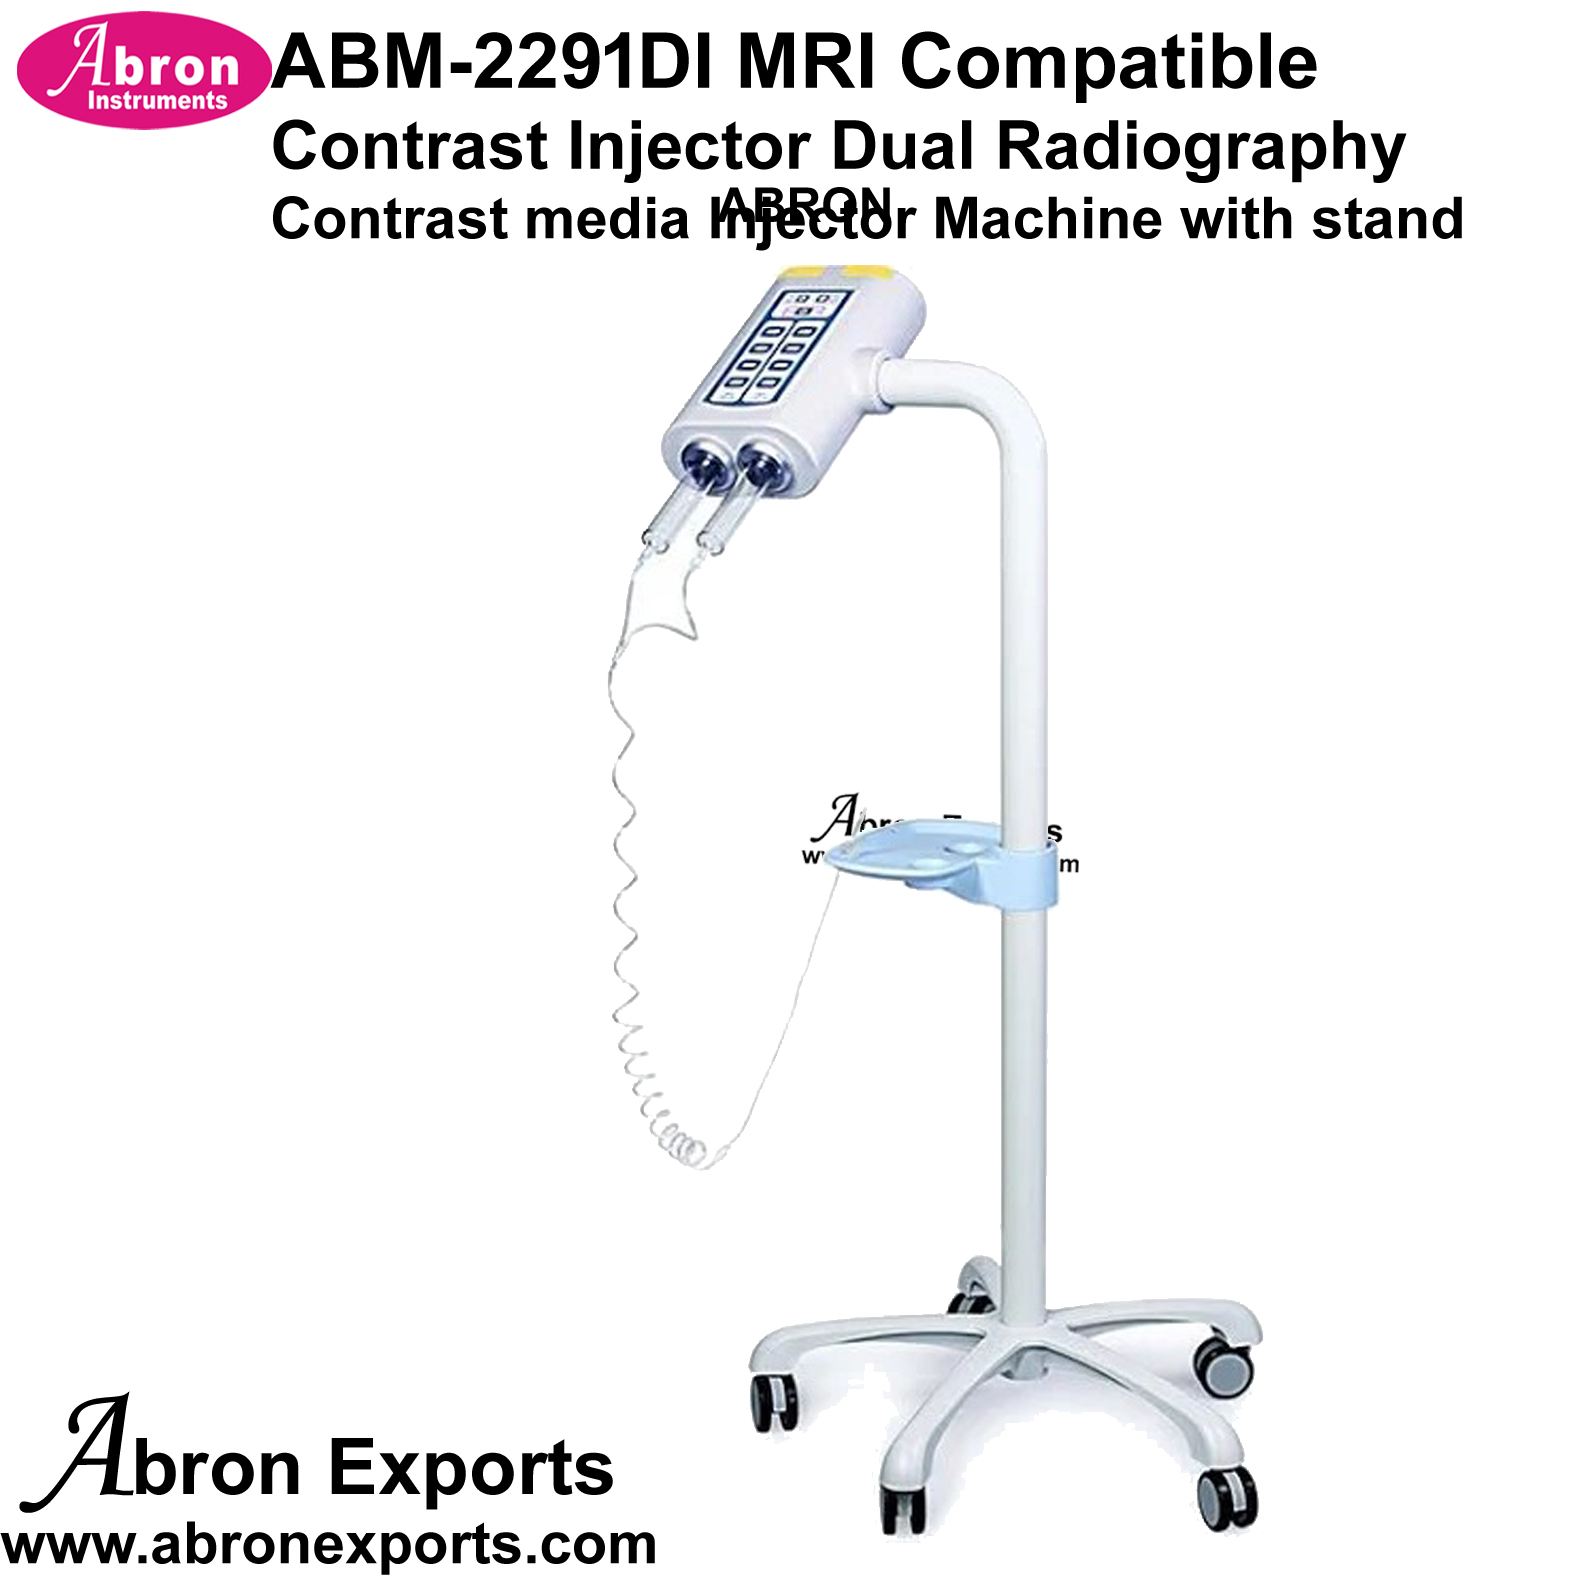 MRI Compatible Contrast Injector Dual Radiography Contrast Media Injector Machine With Stand Abron ABM-2291DI 